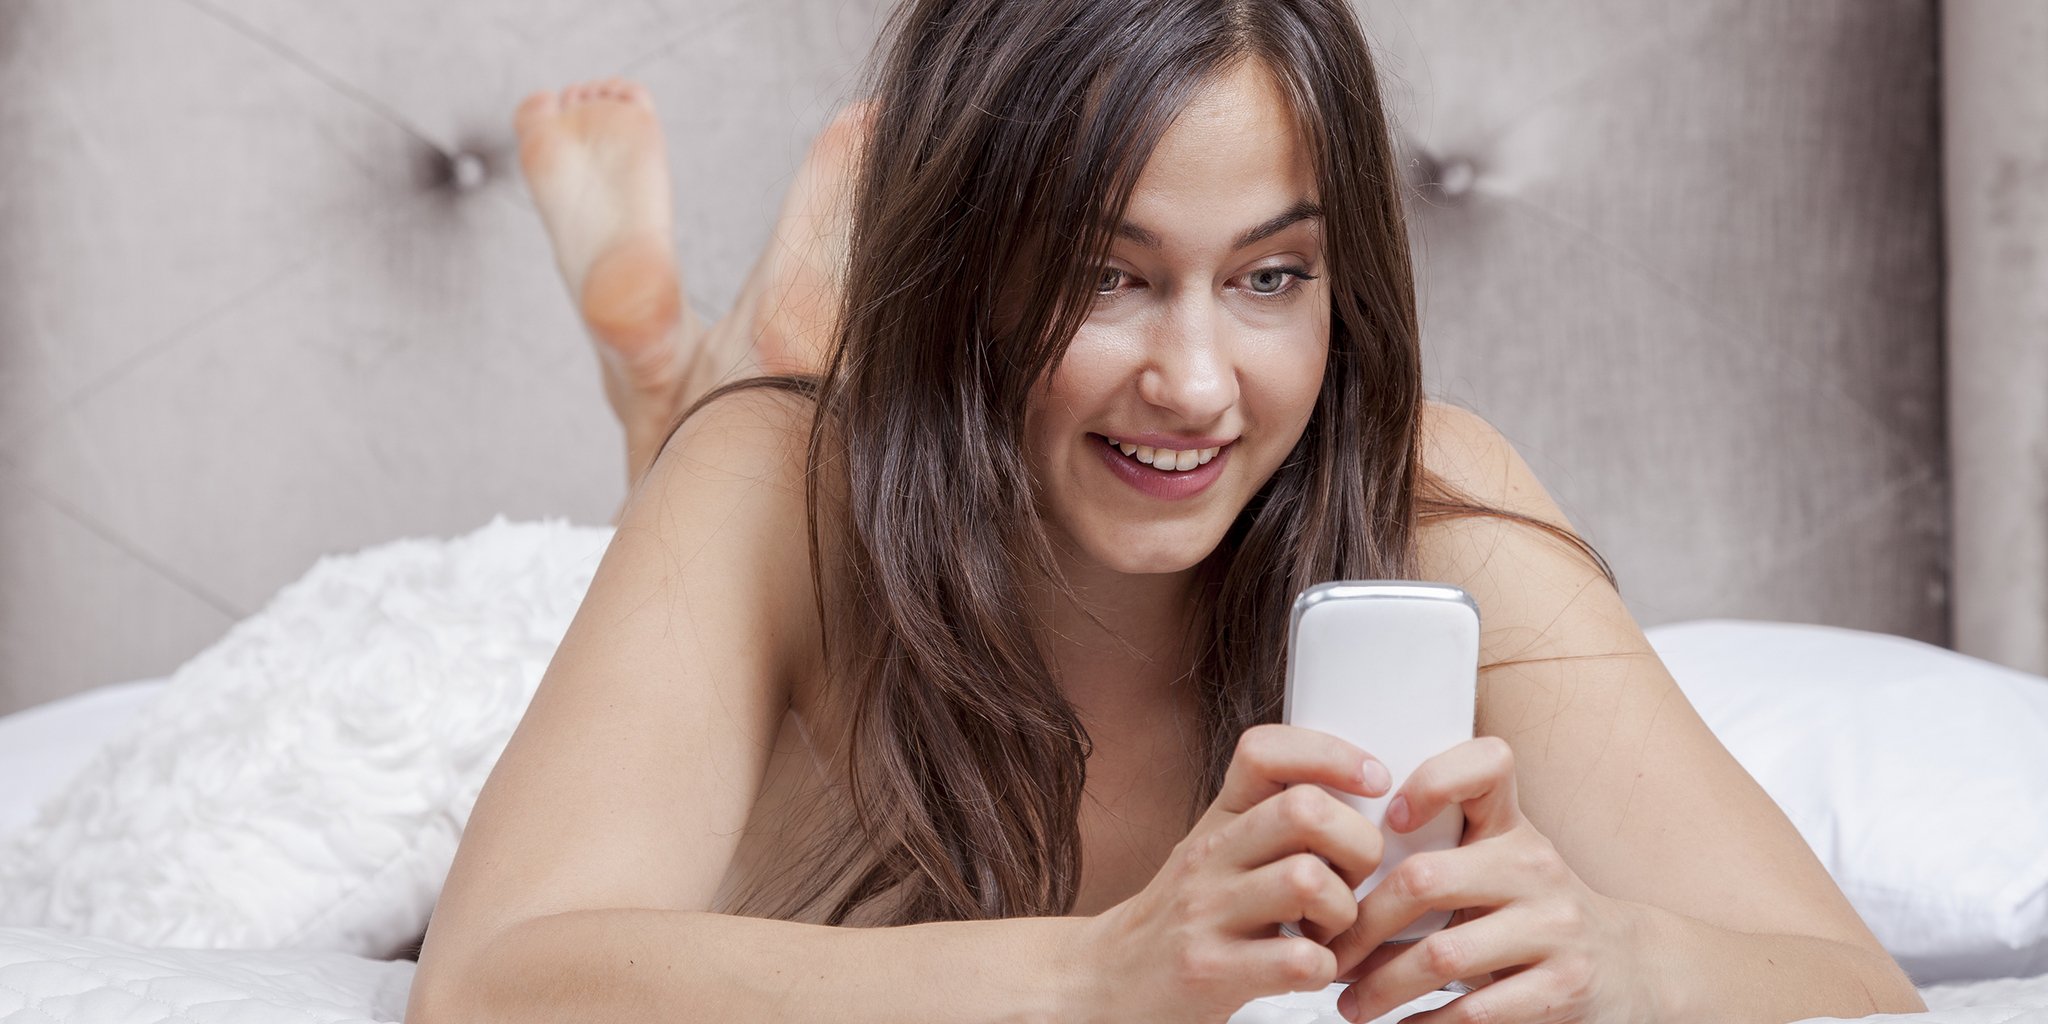 how to watch porn on your smartphone without catching a virus